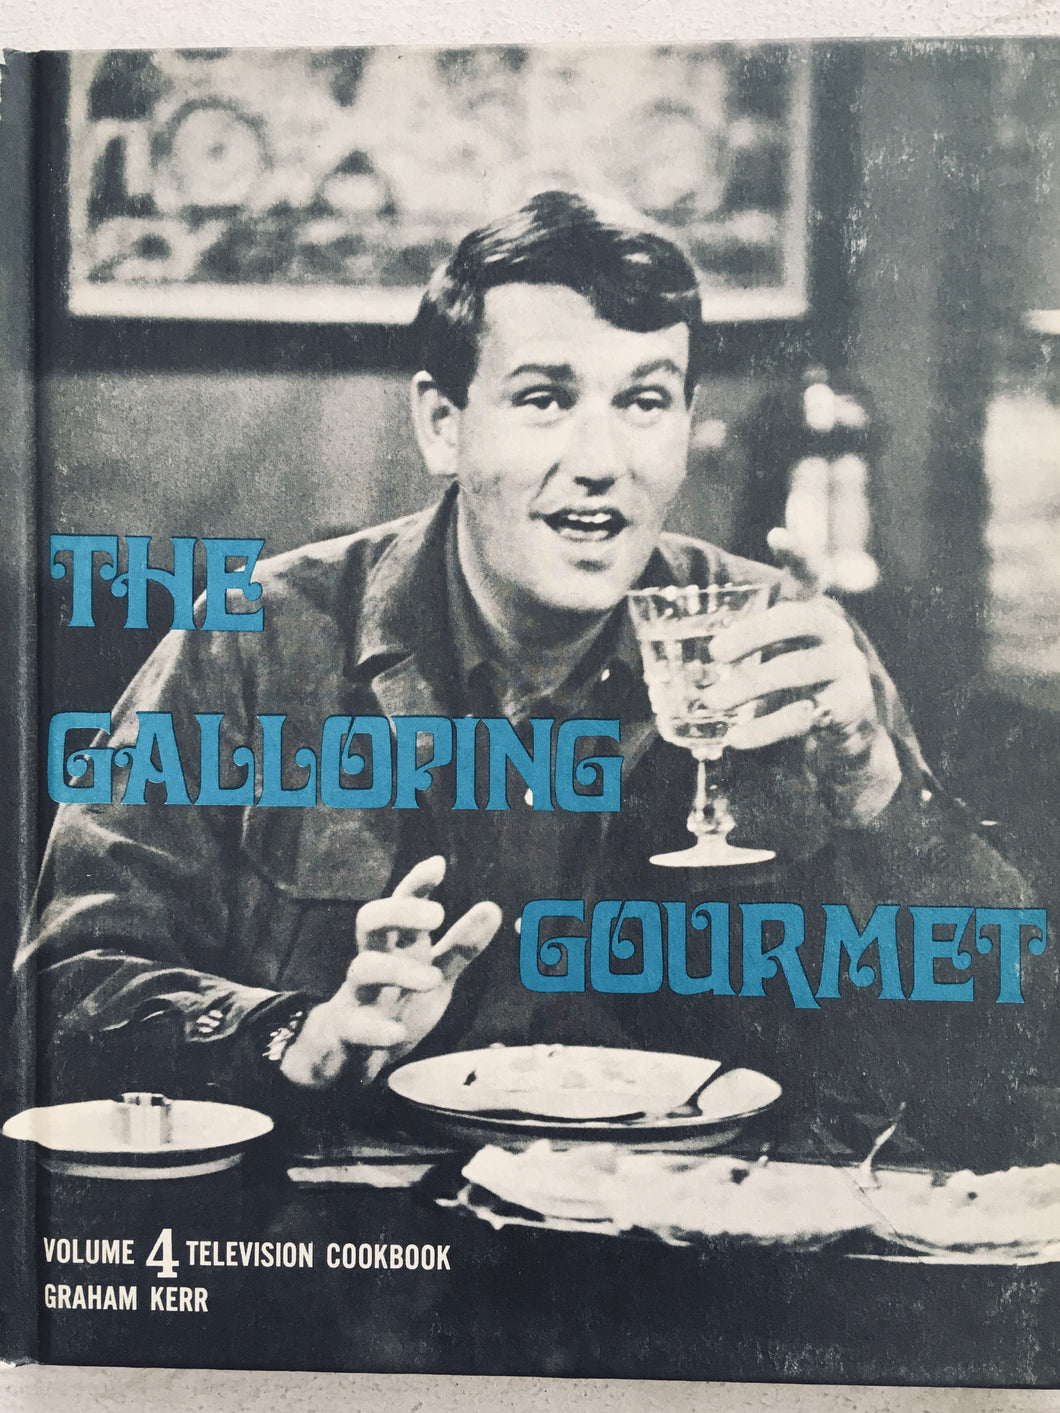 The Galloping Gourmet Television Cookbook Vol 4 by Graham Kerr